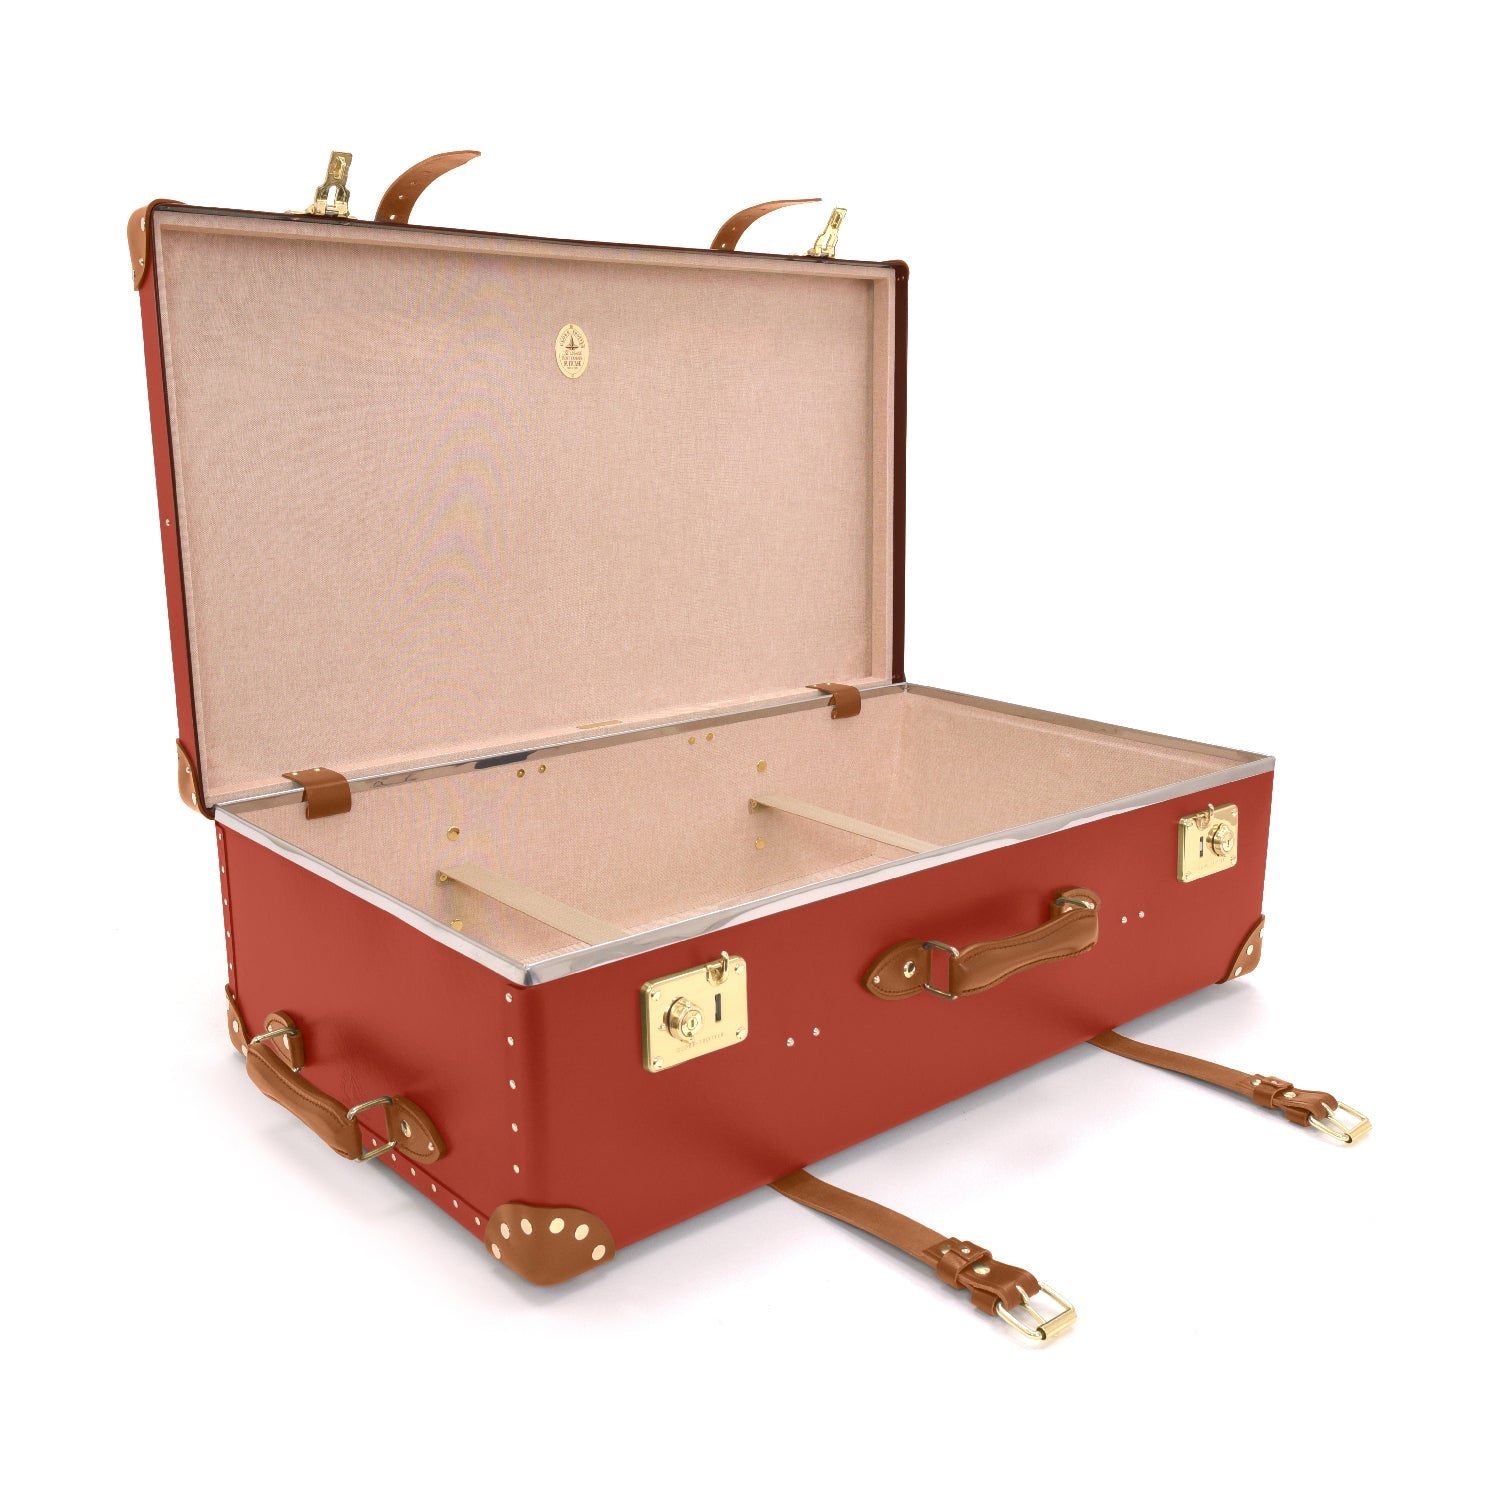 Centenary · XL Suitcase | Red/Caramel - GLOBE-TROTTER